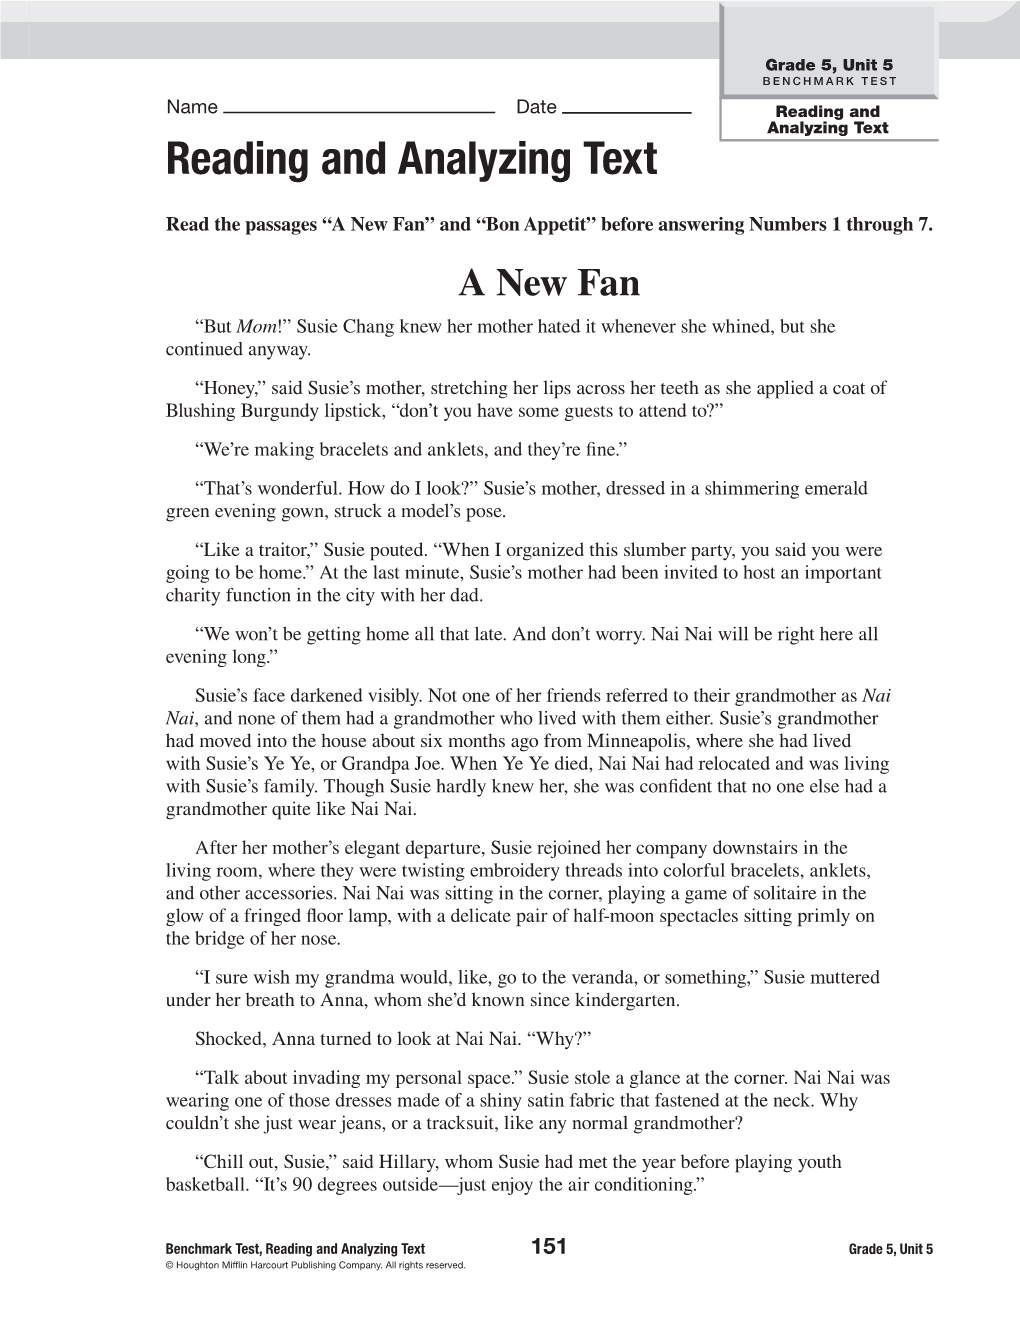 Reading and Analyzing Text Reading and Analyzing Text